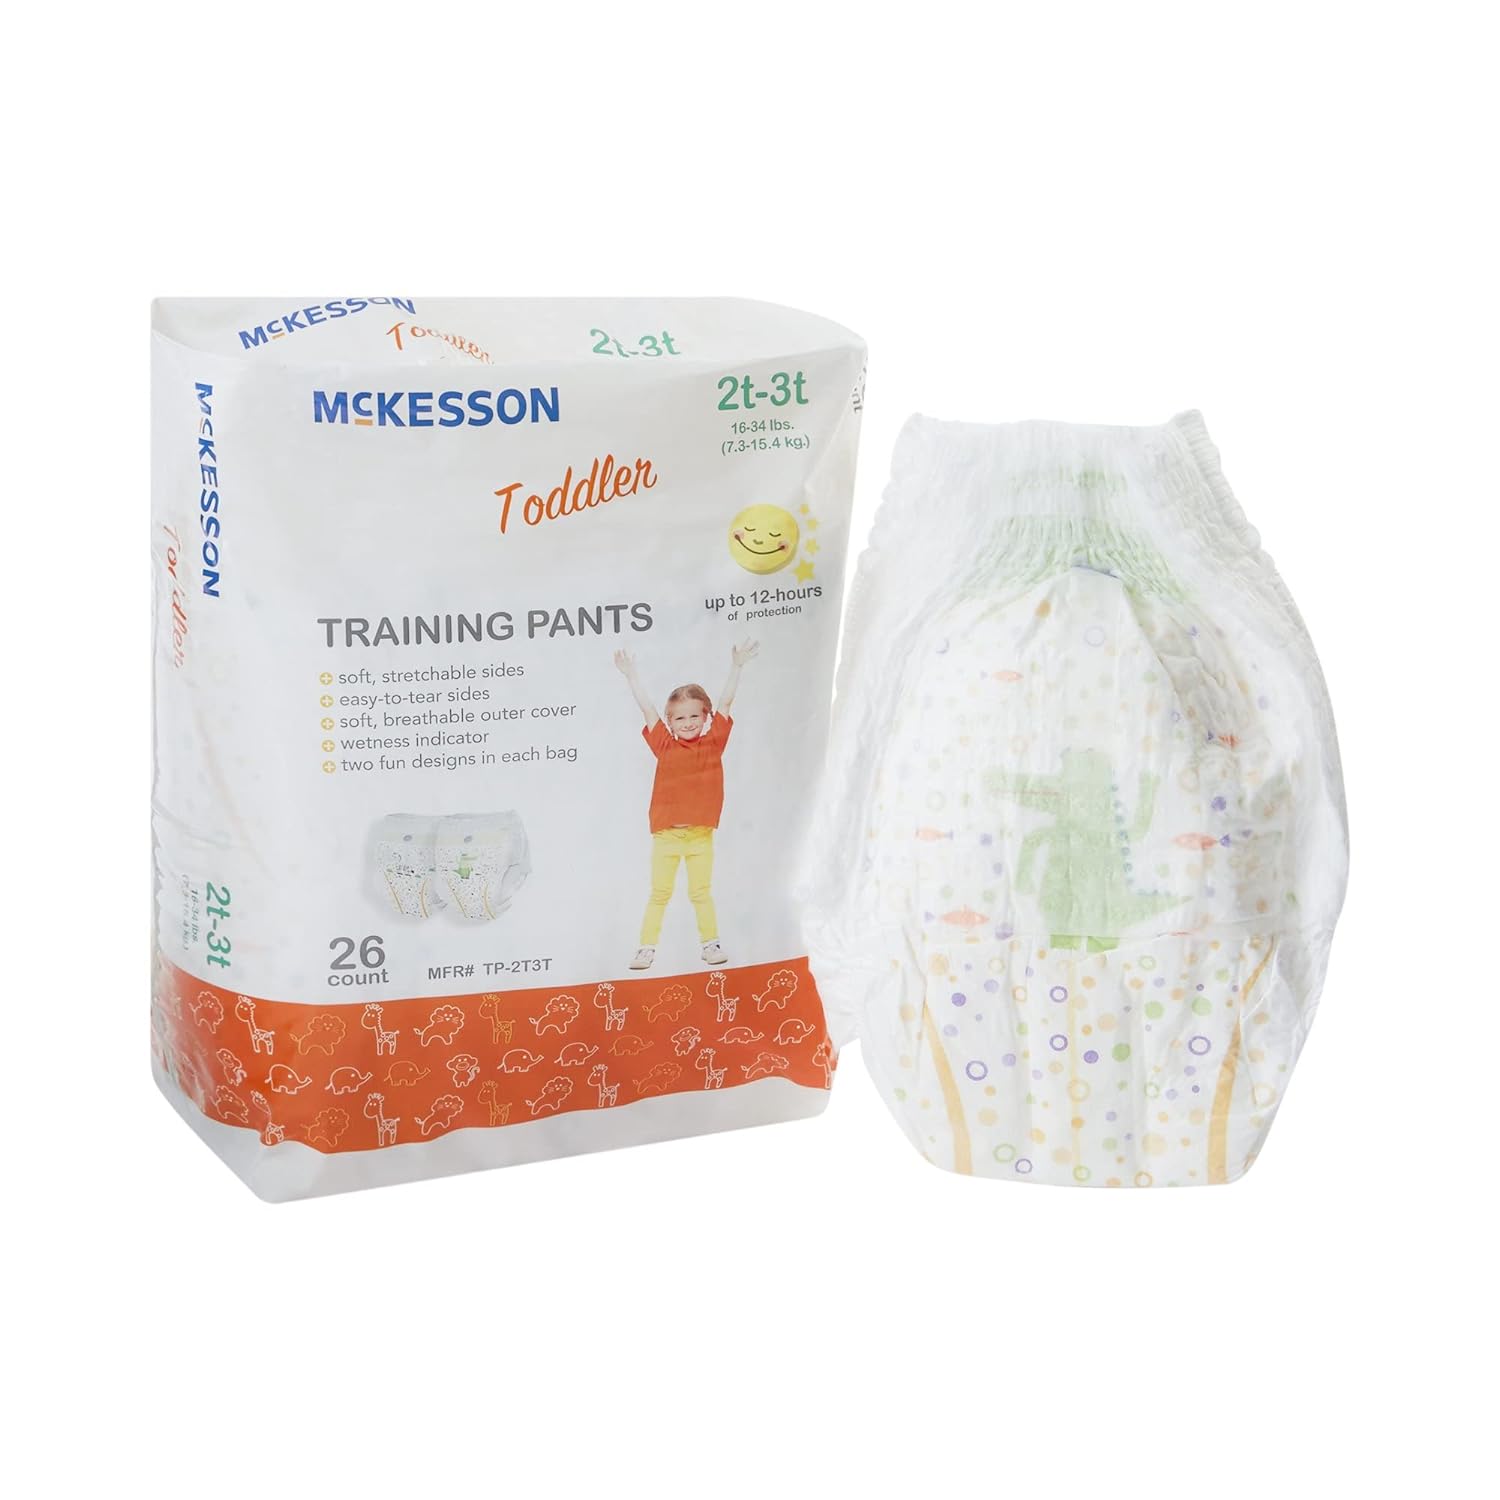 McKesson Toddler Training Pants, Disposable, 2T to 3T, 16 lbs to 34 lbs, 26 Count, 1 Pack